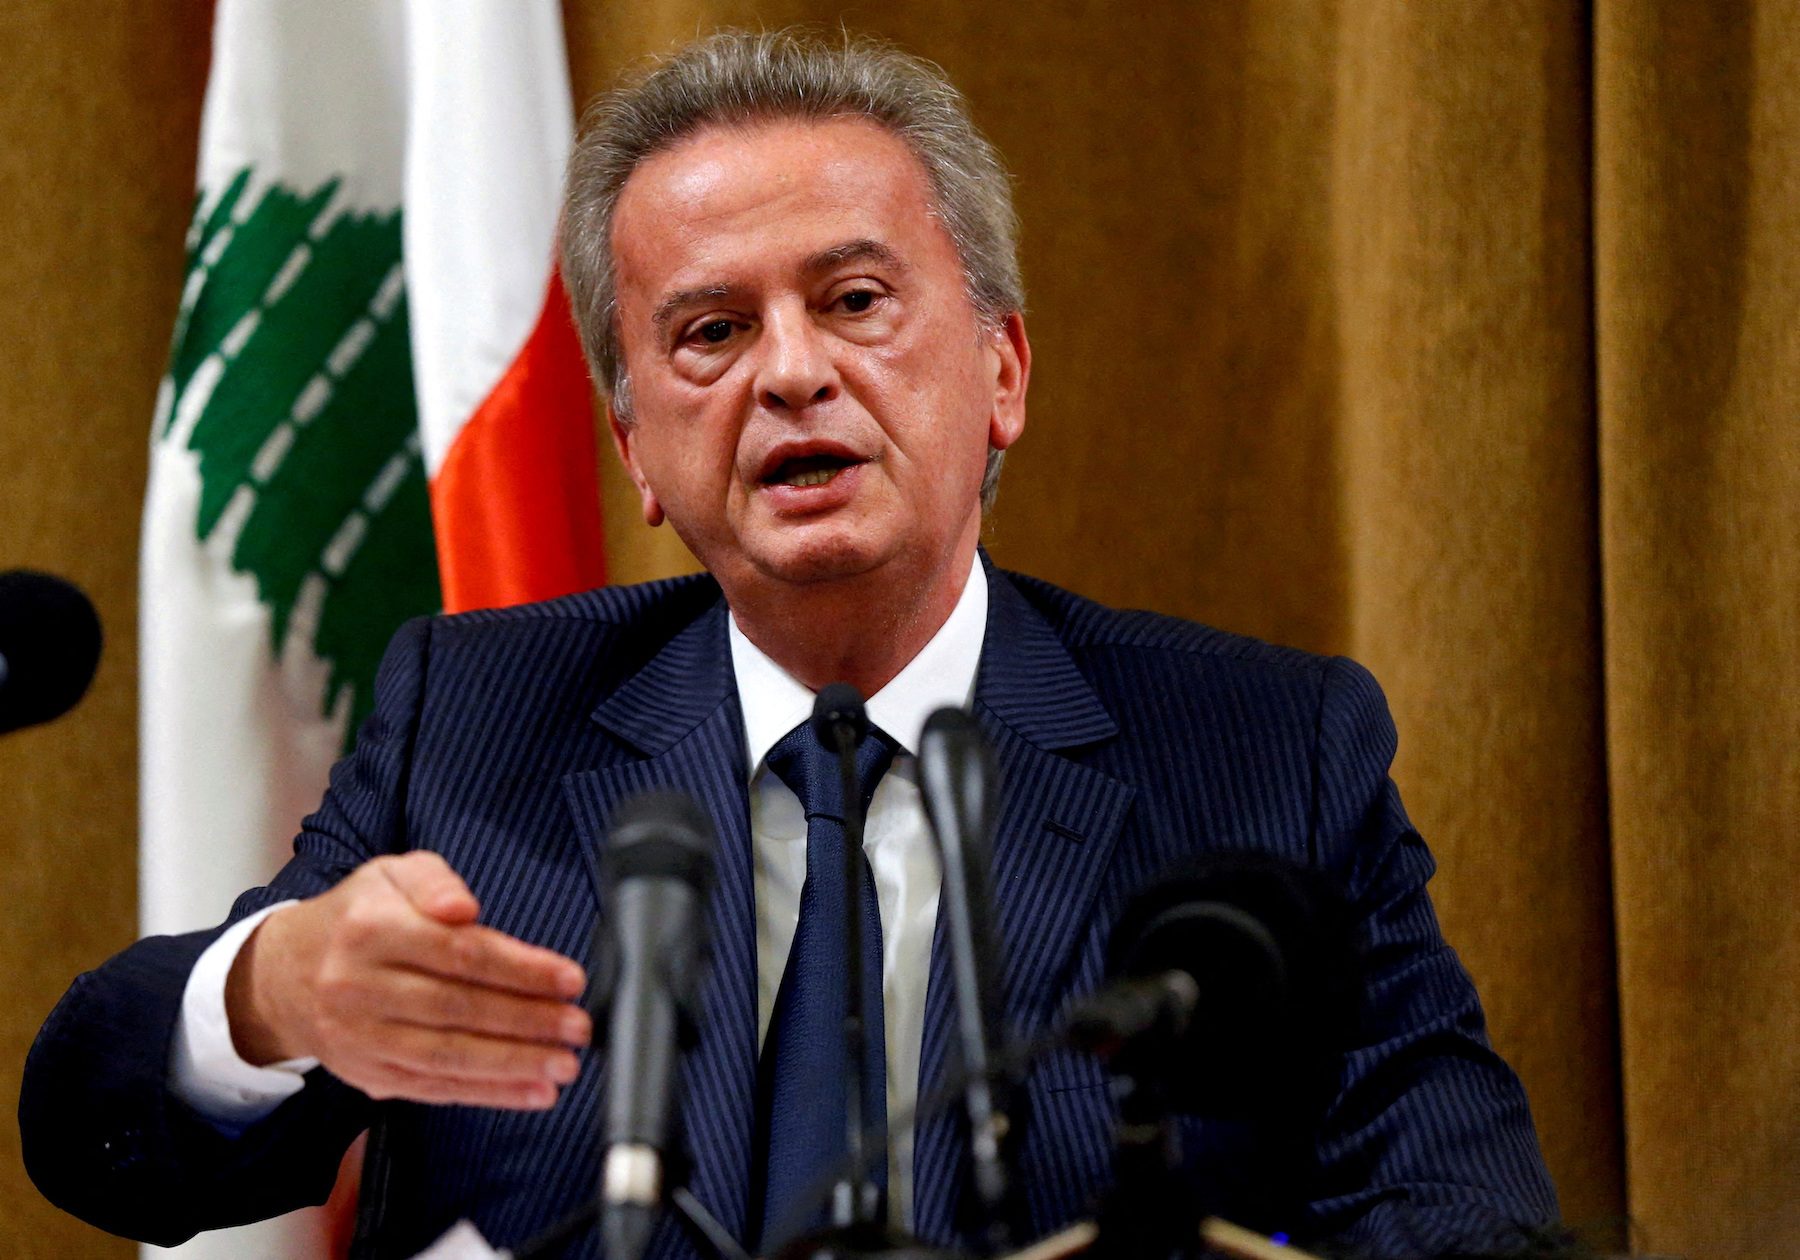 Lebanon central bank governor faces new fraud, embezzlement charges